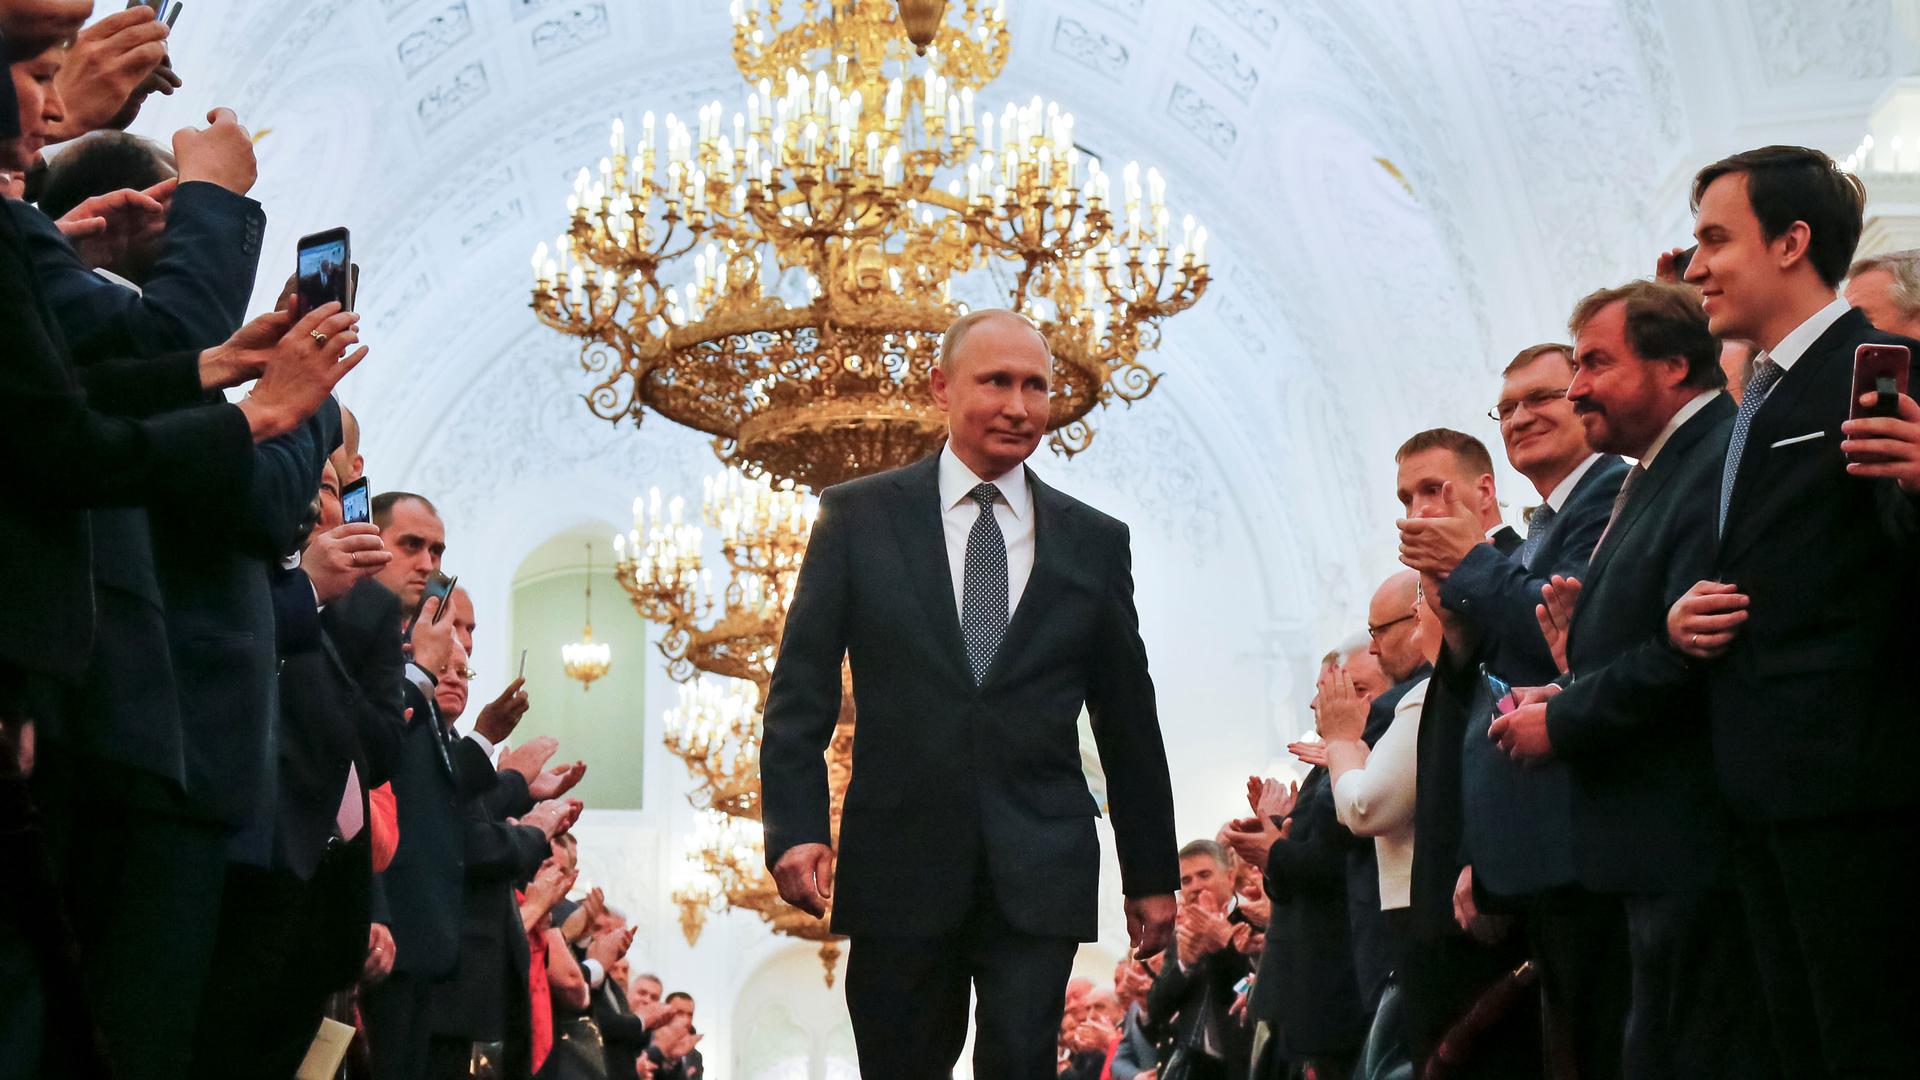 Vladimir Putin walks between two rows of people clapping their hands and taking photos with their cell phones